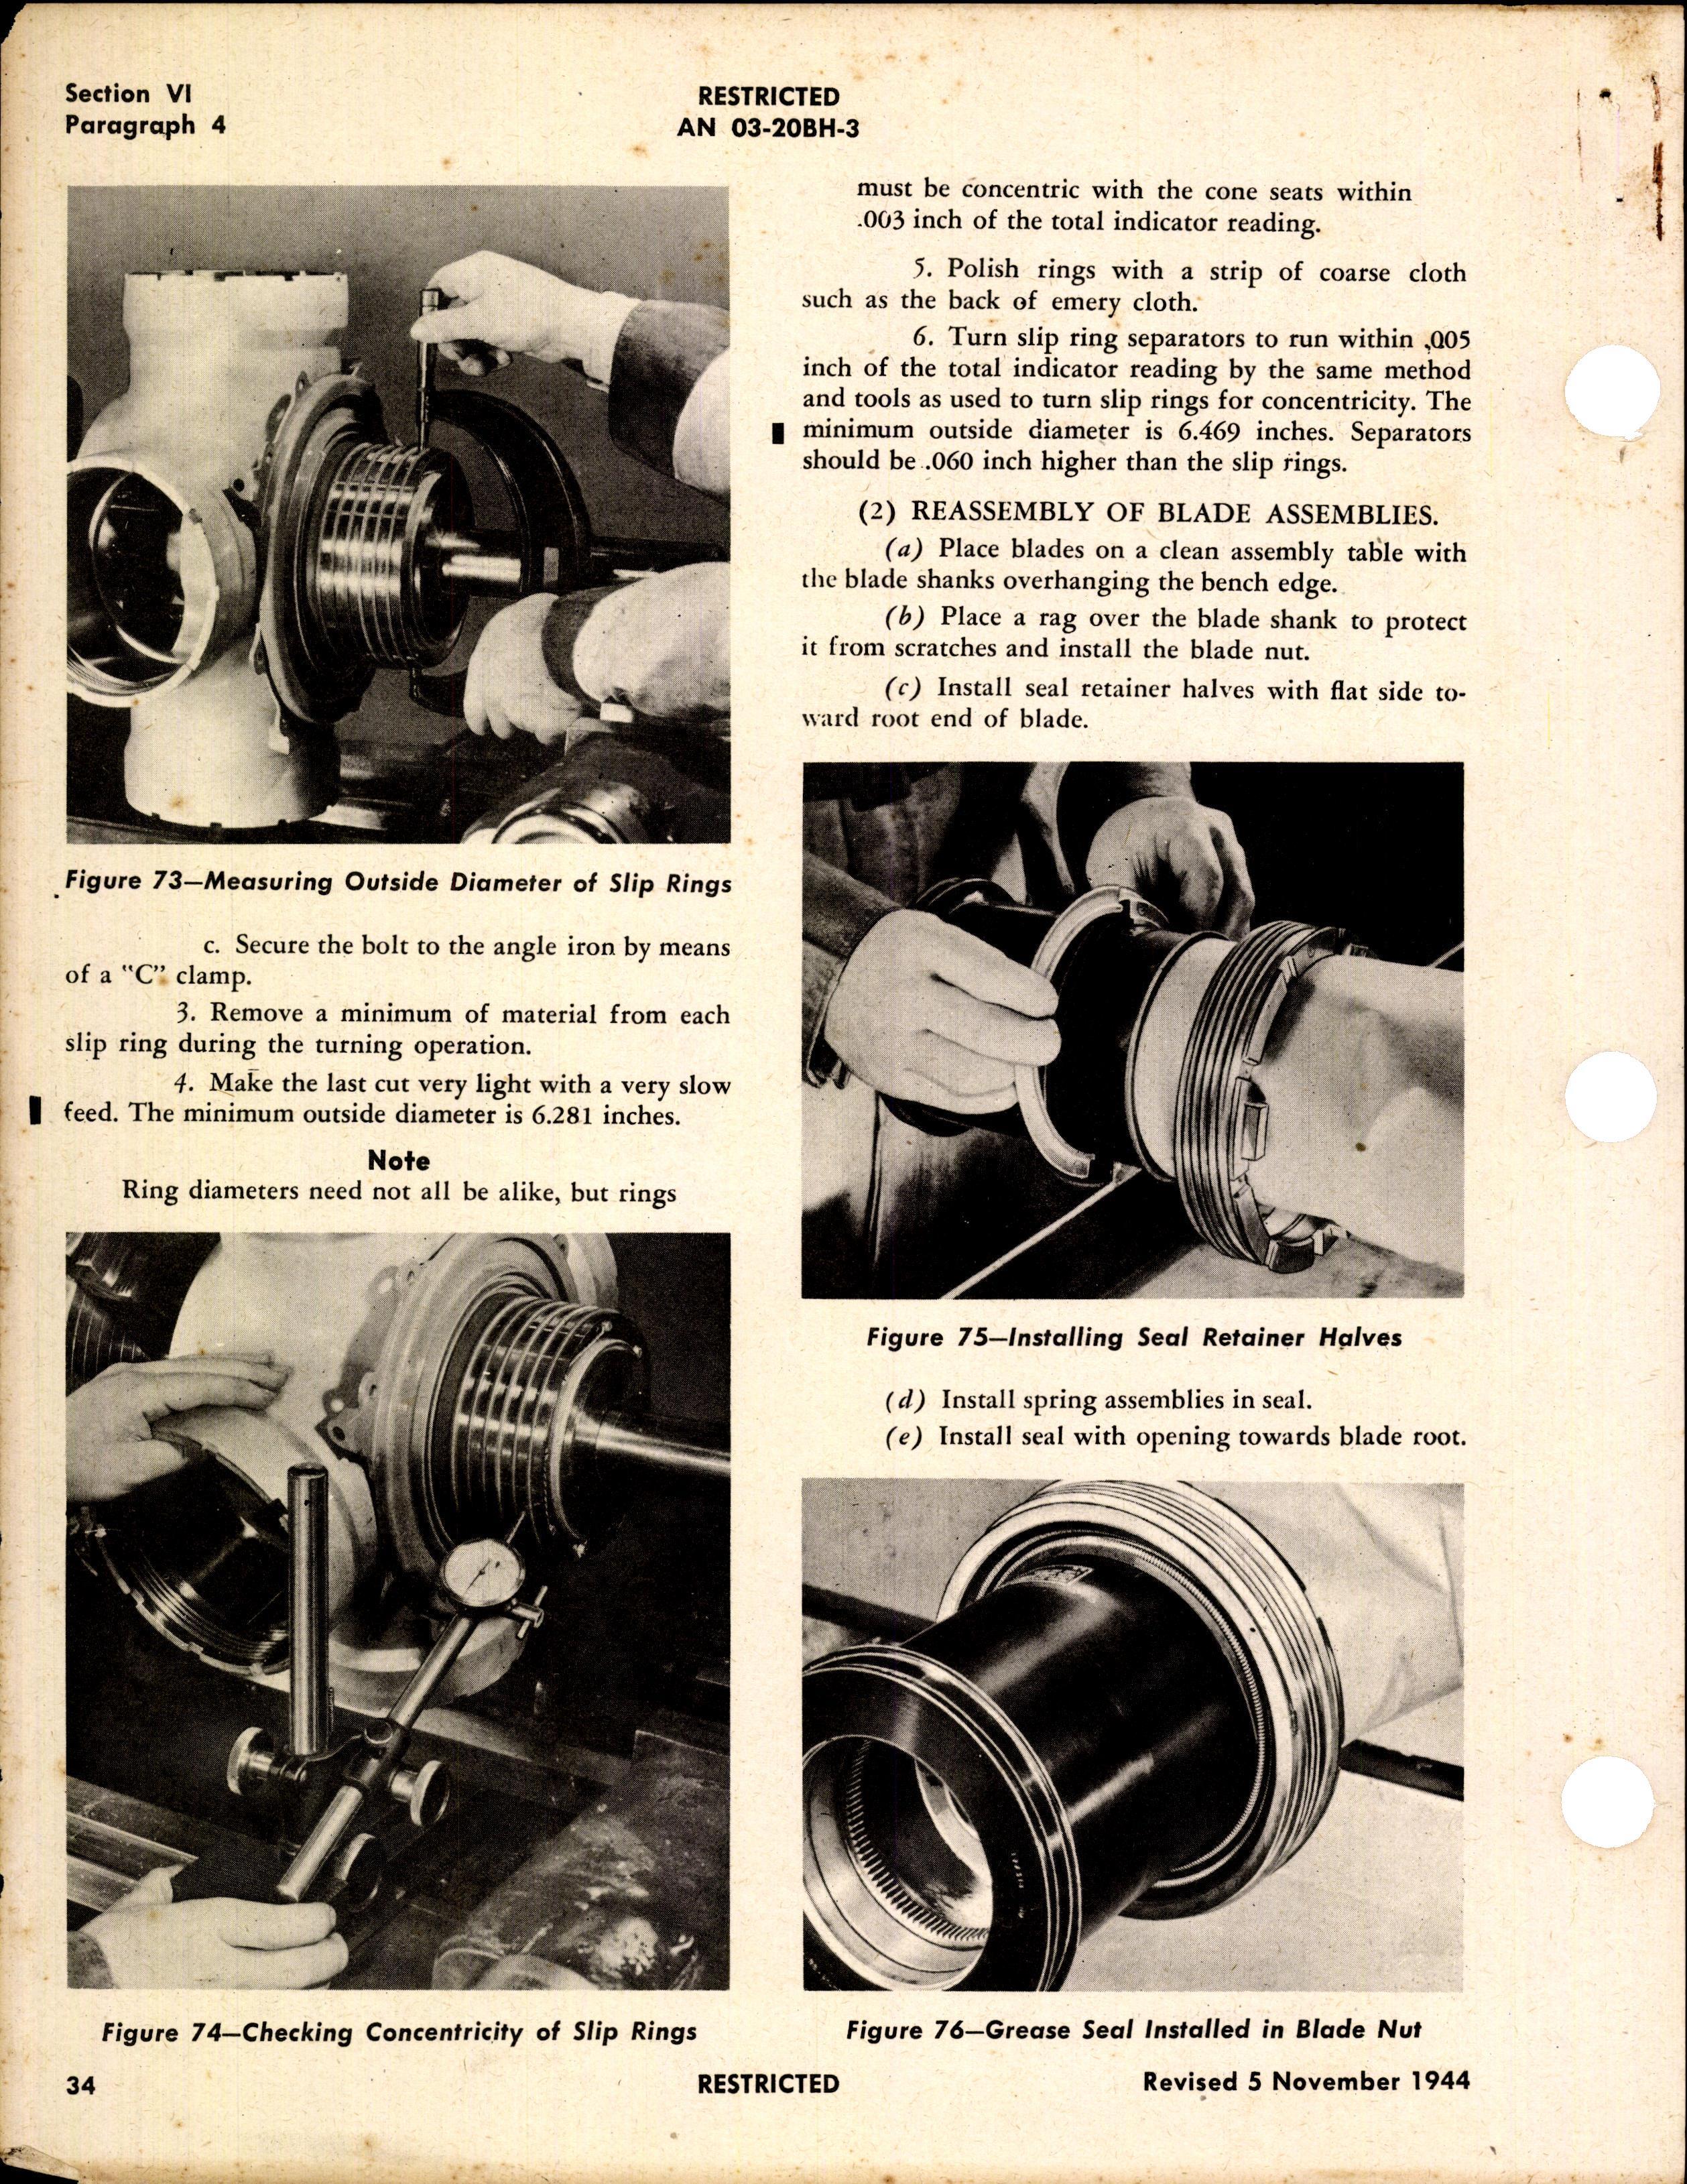 Sample page 6 from AirCorps Library document: Handbook of Instructions with Parts Catalog for Model C542S-B Electric Propellers- Hollow Steel